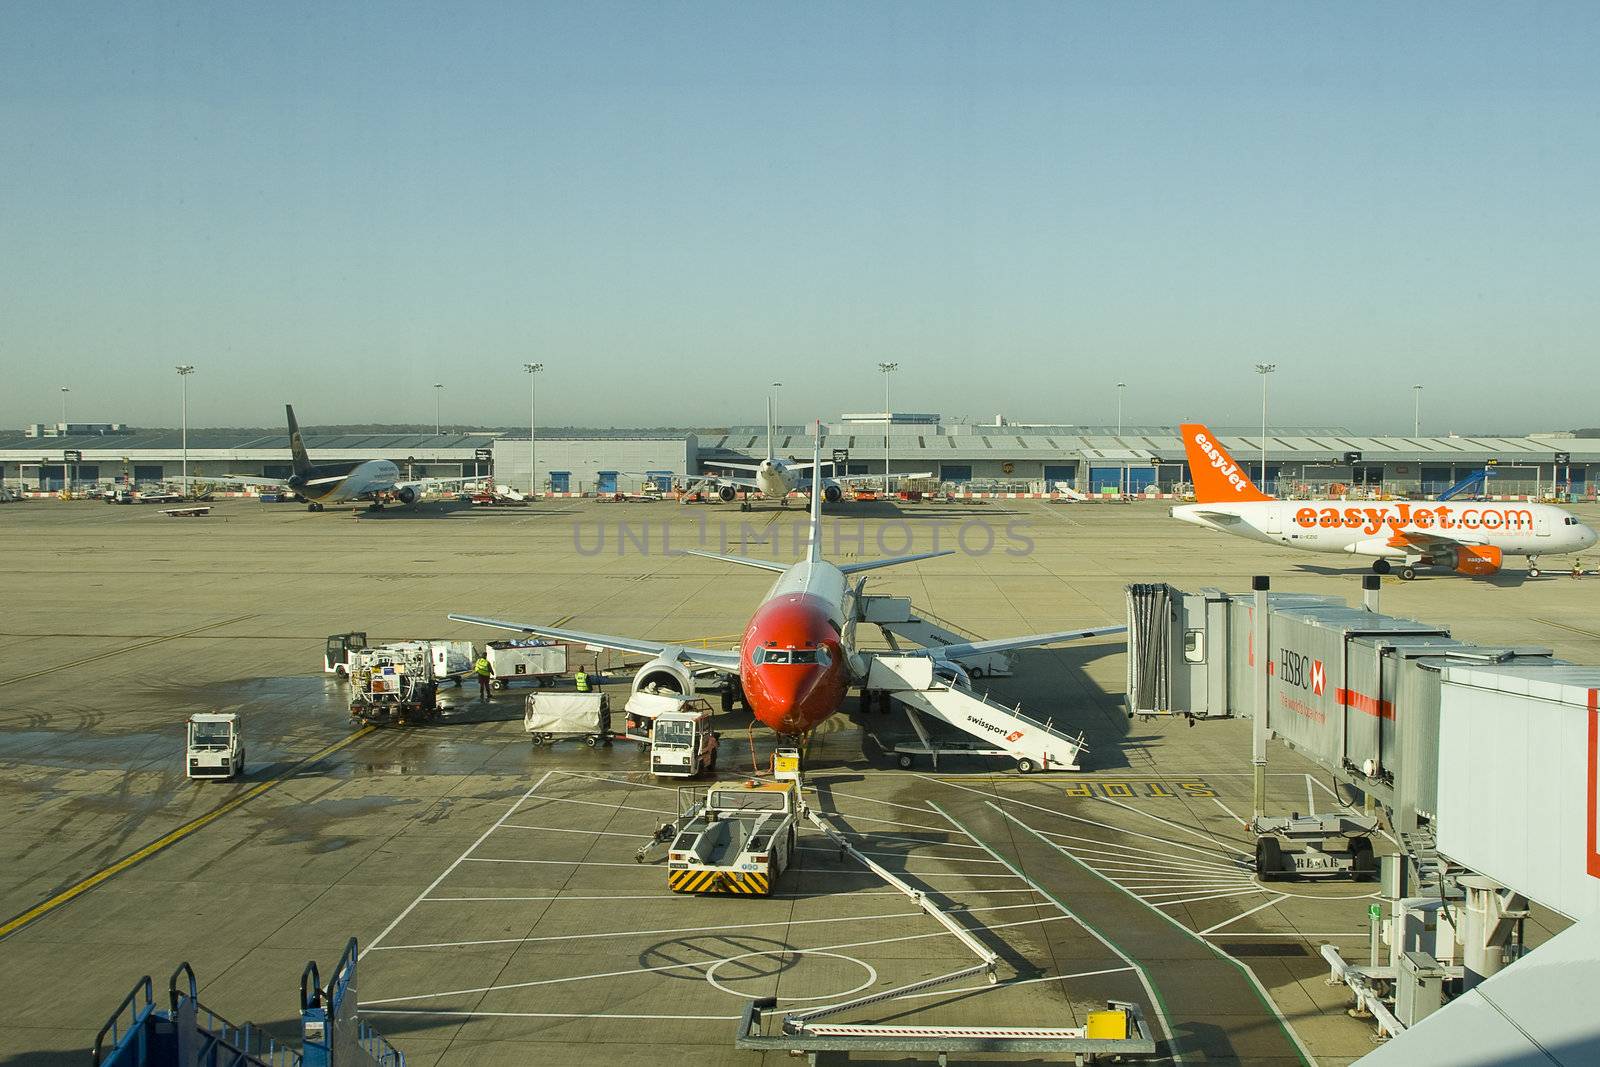 A Norwegian Air Shuttle airplane gets maintenance and refueling before accepting new passengers at London Stansted Airport. Easyjet is in the background, off to departure.